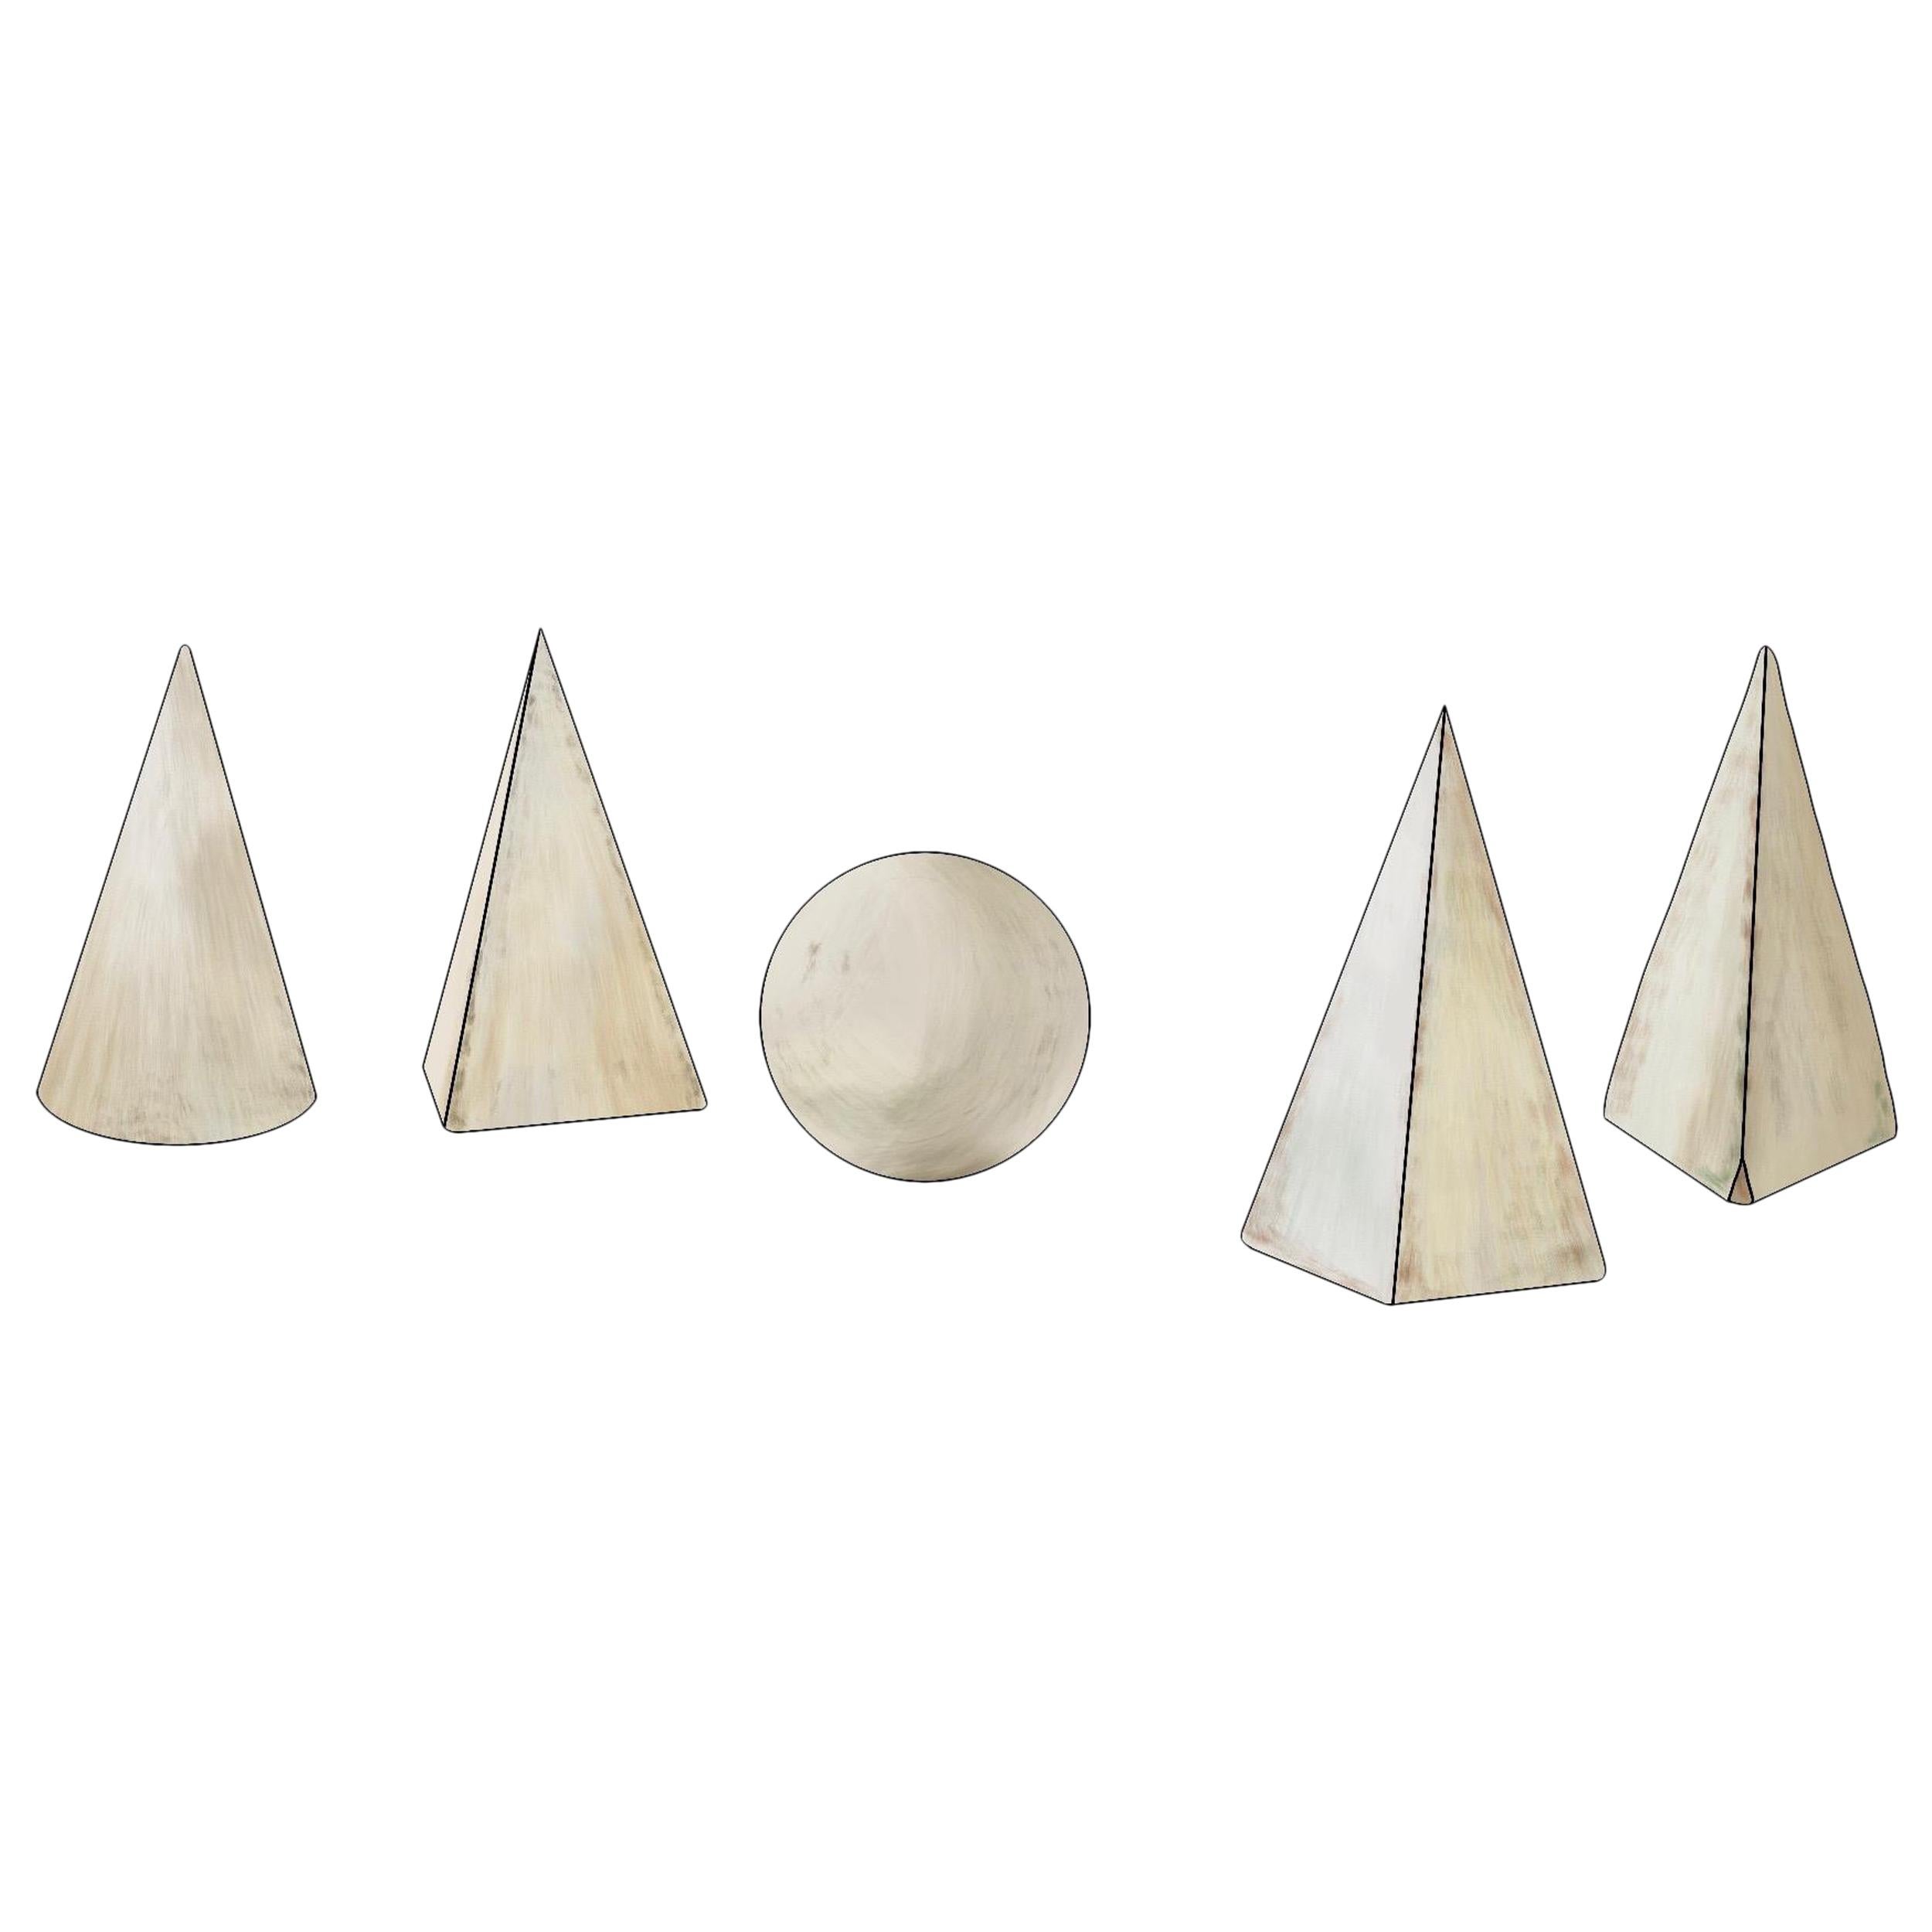 Set of 5 White Painted Wooden Geometric Molds For Sale